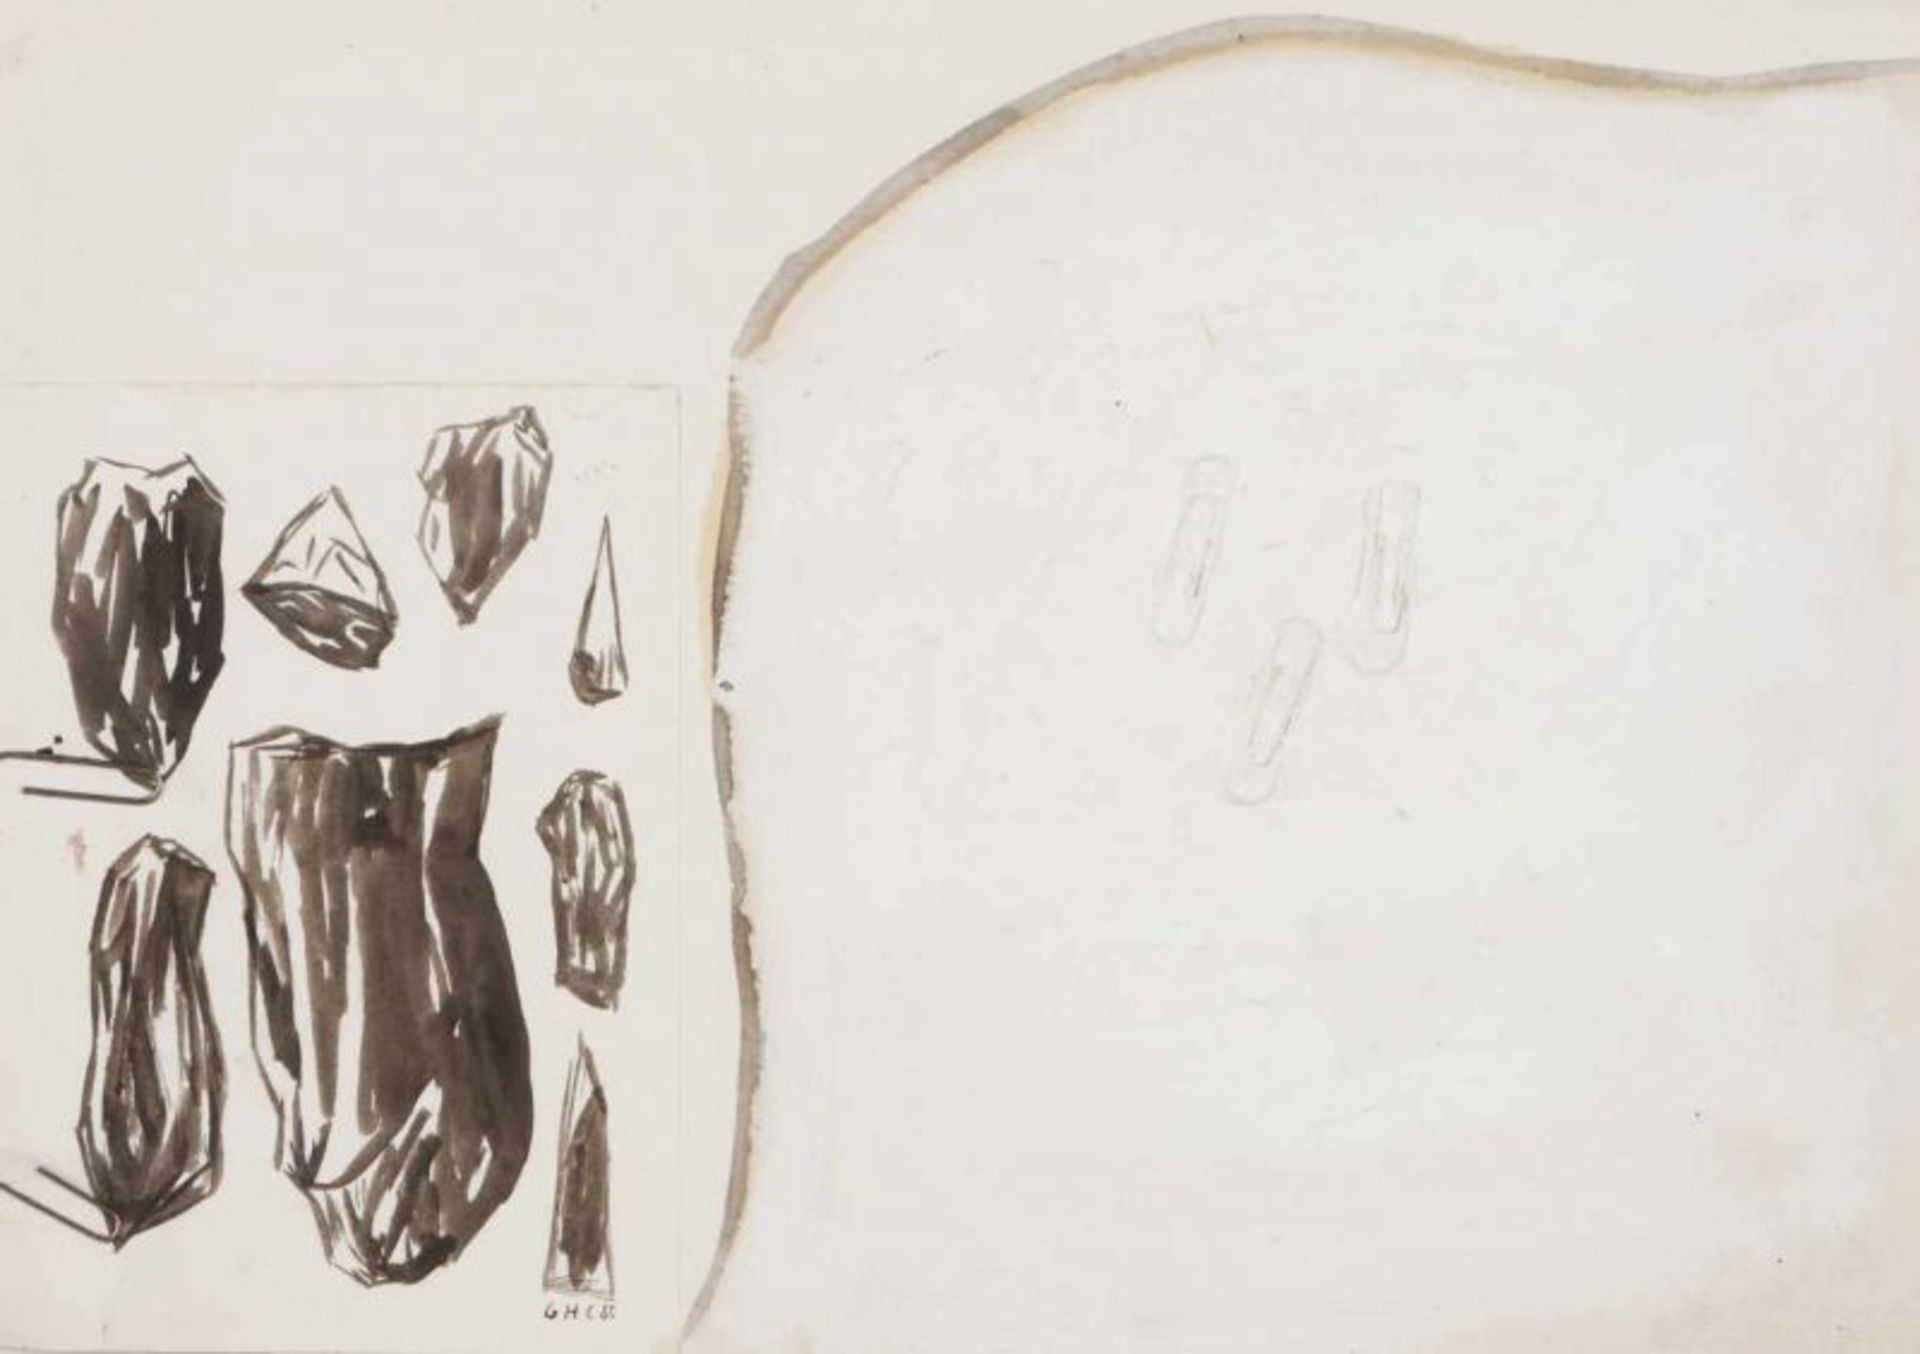 Gil Heitor Cortesão (n. 1967) Untitled Mixed media on paper Signed and dated 88 21x29 cm